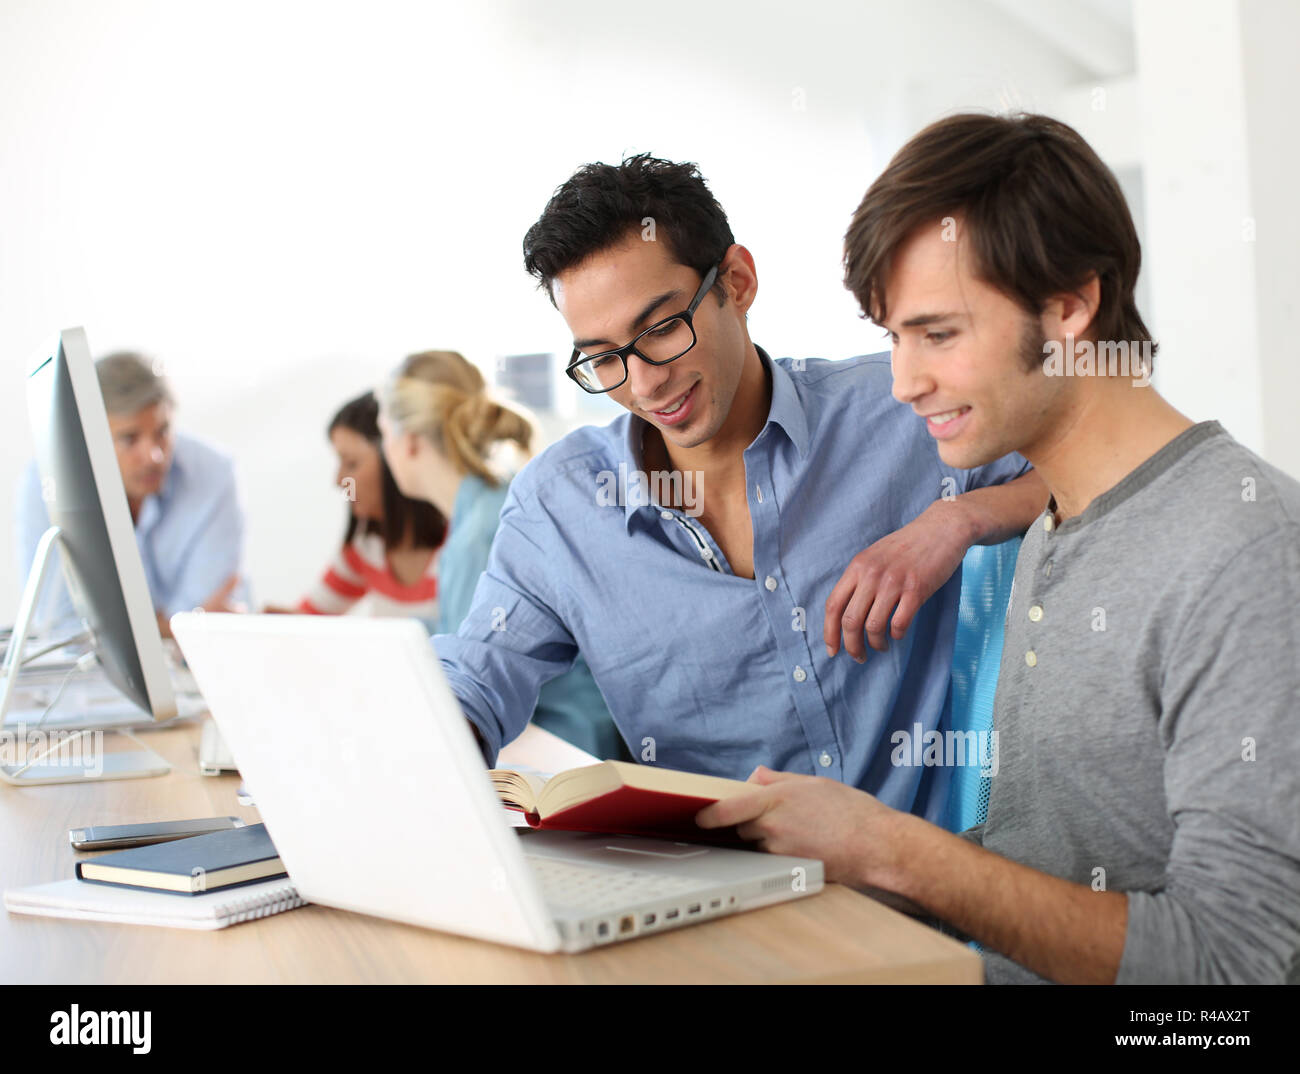 College students working together on project Stock Photo